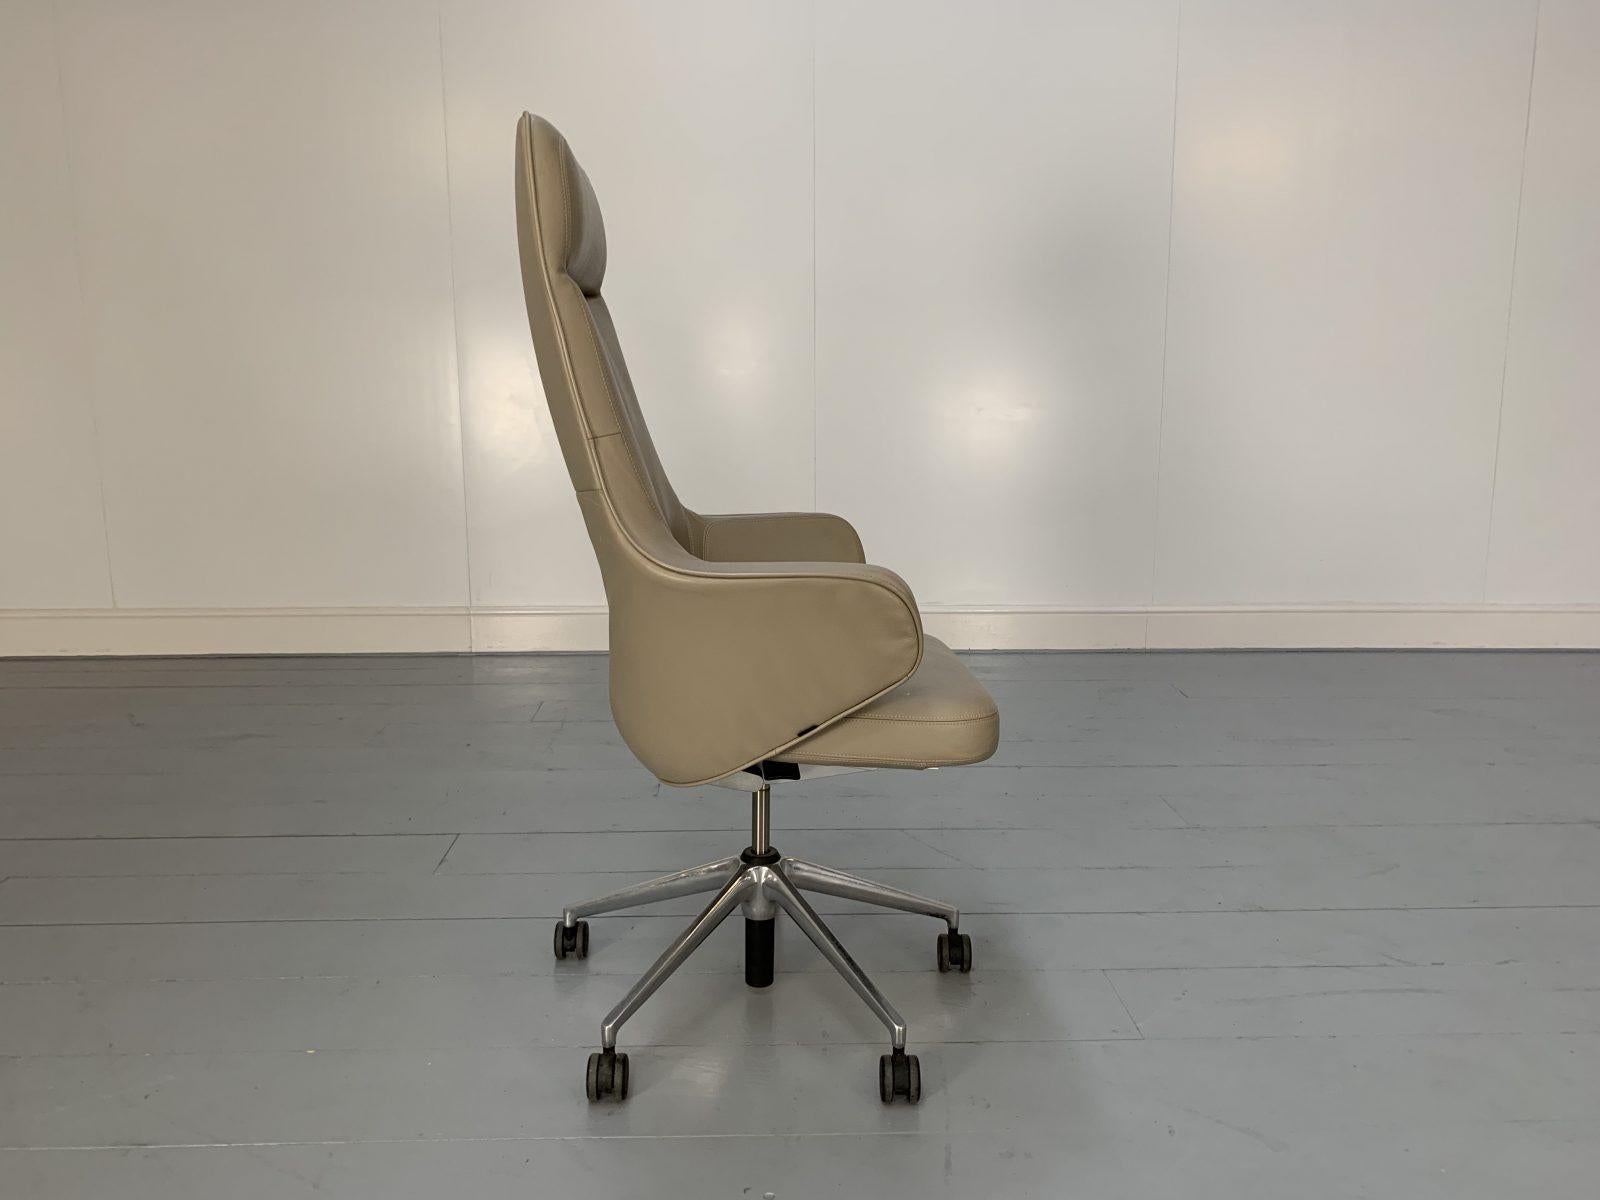 Vitra “Grand Executive” Office Armchair Chair in “Premium” Sand Leather In Good Condition In Barrowford, GB